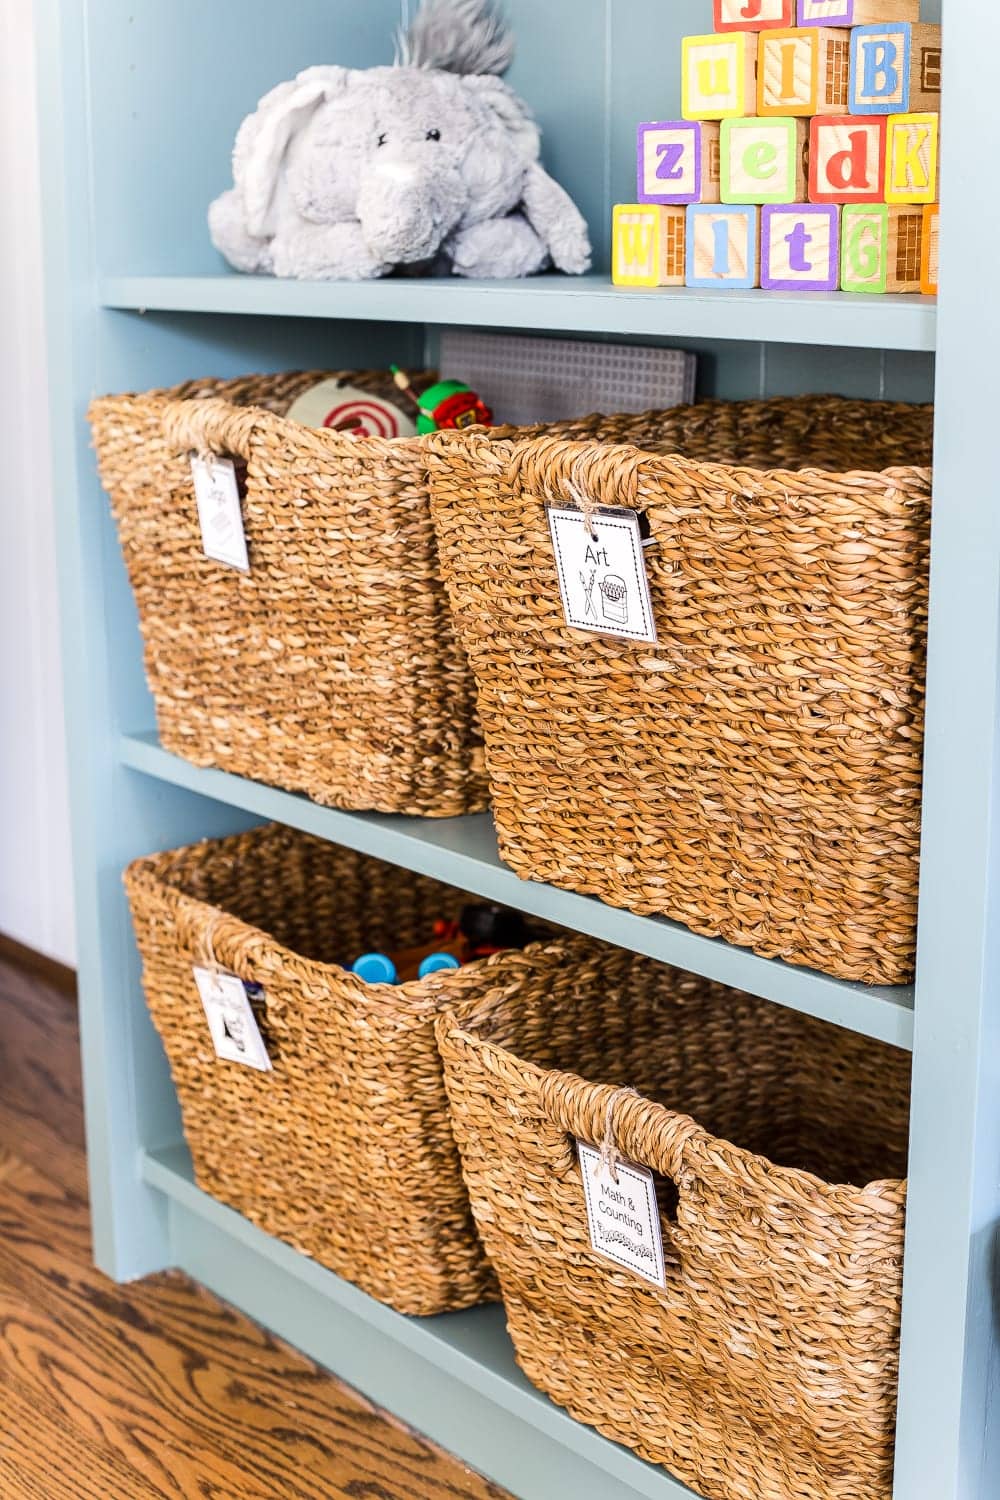 toy organization and playroom storage with printable labels